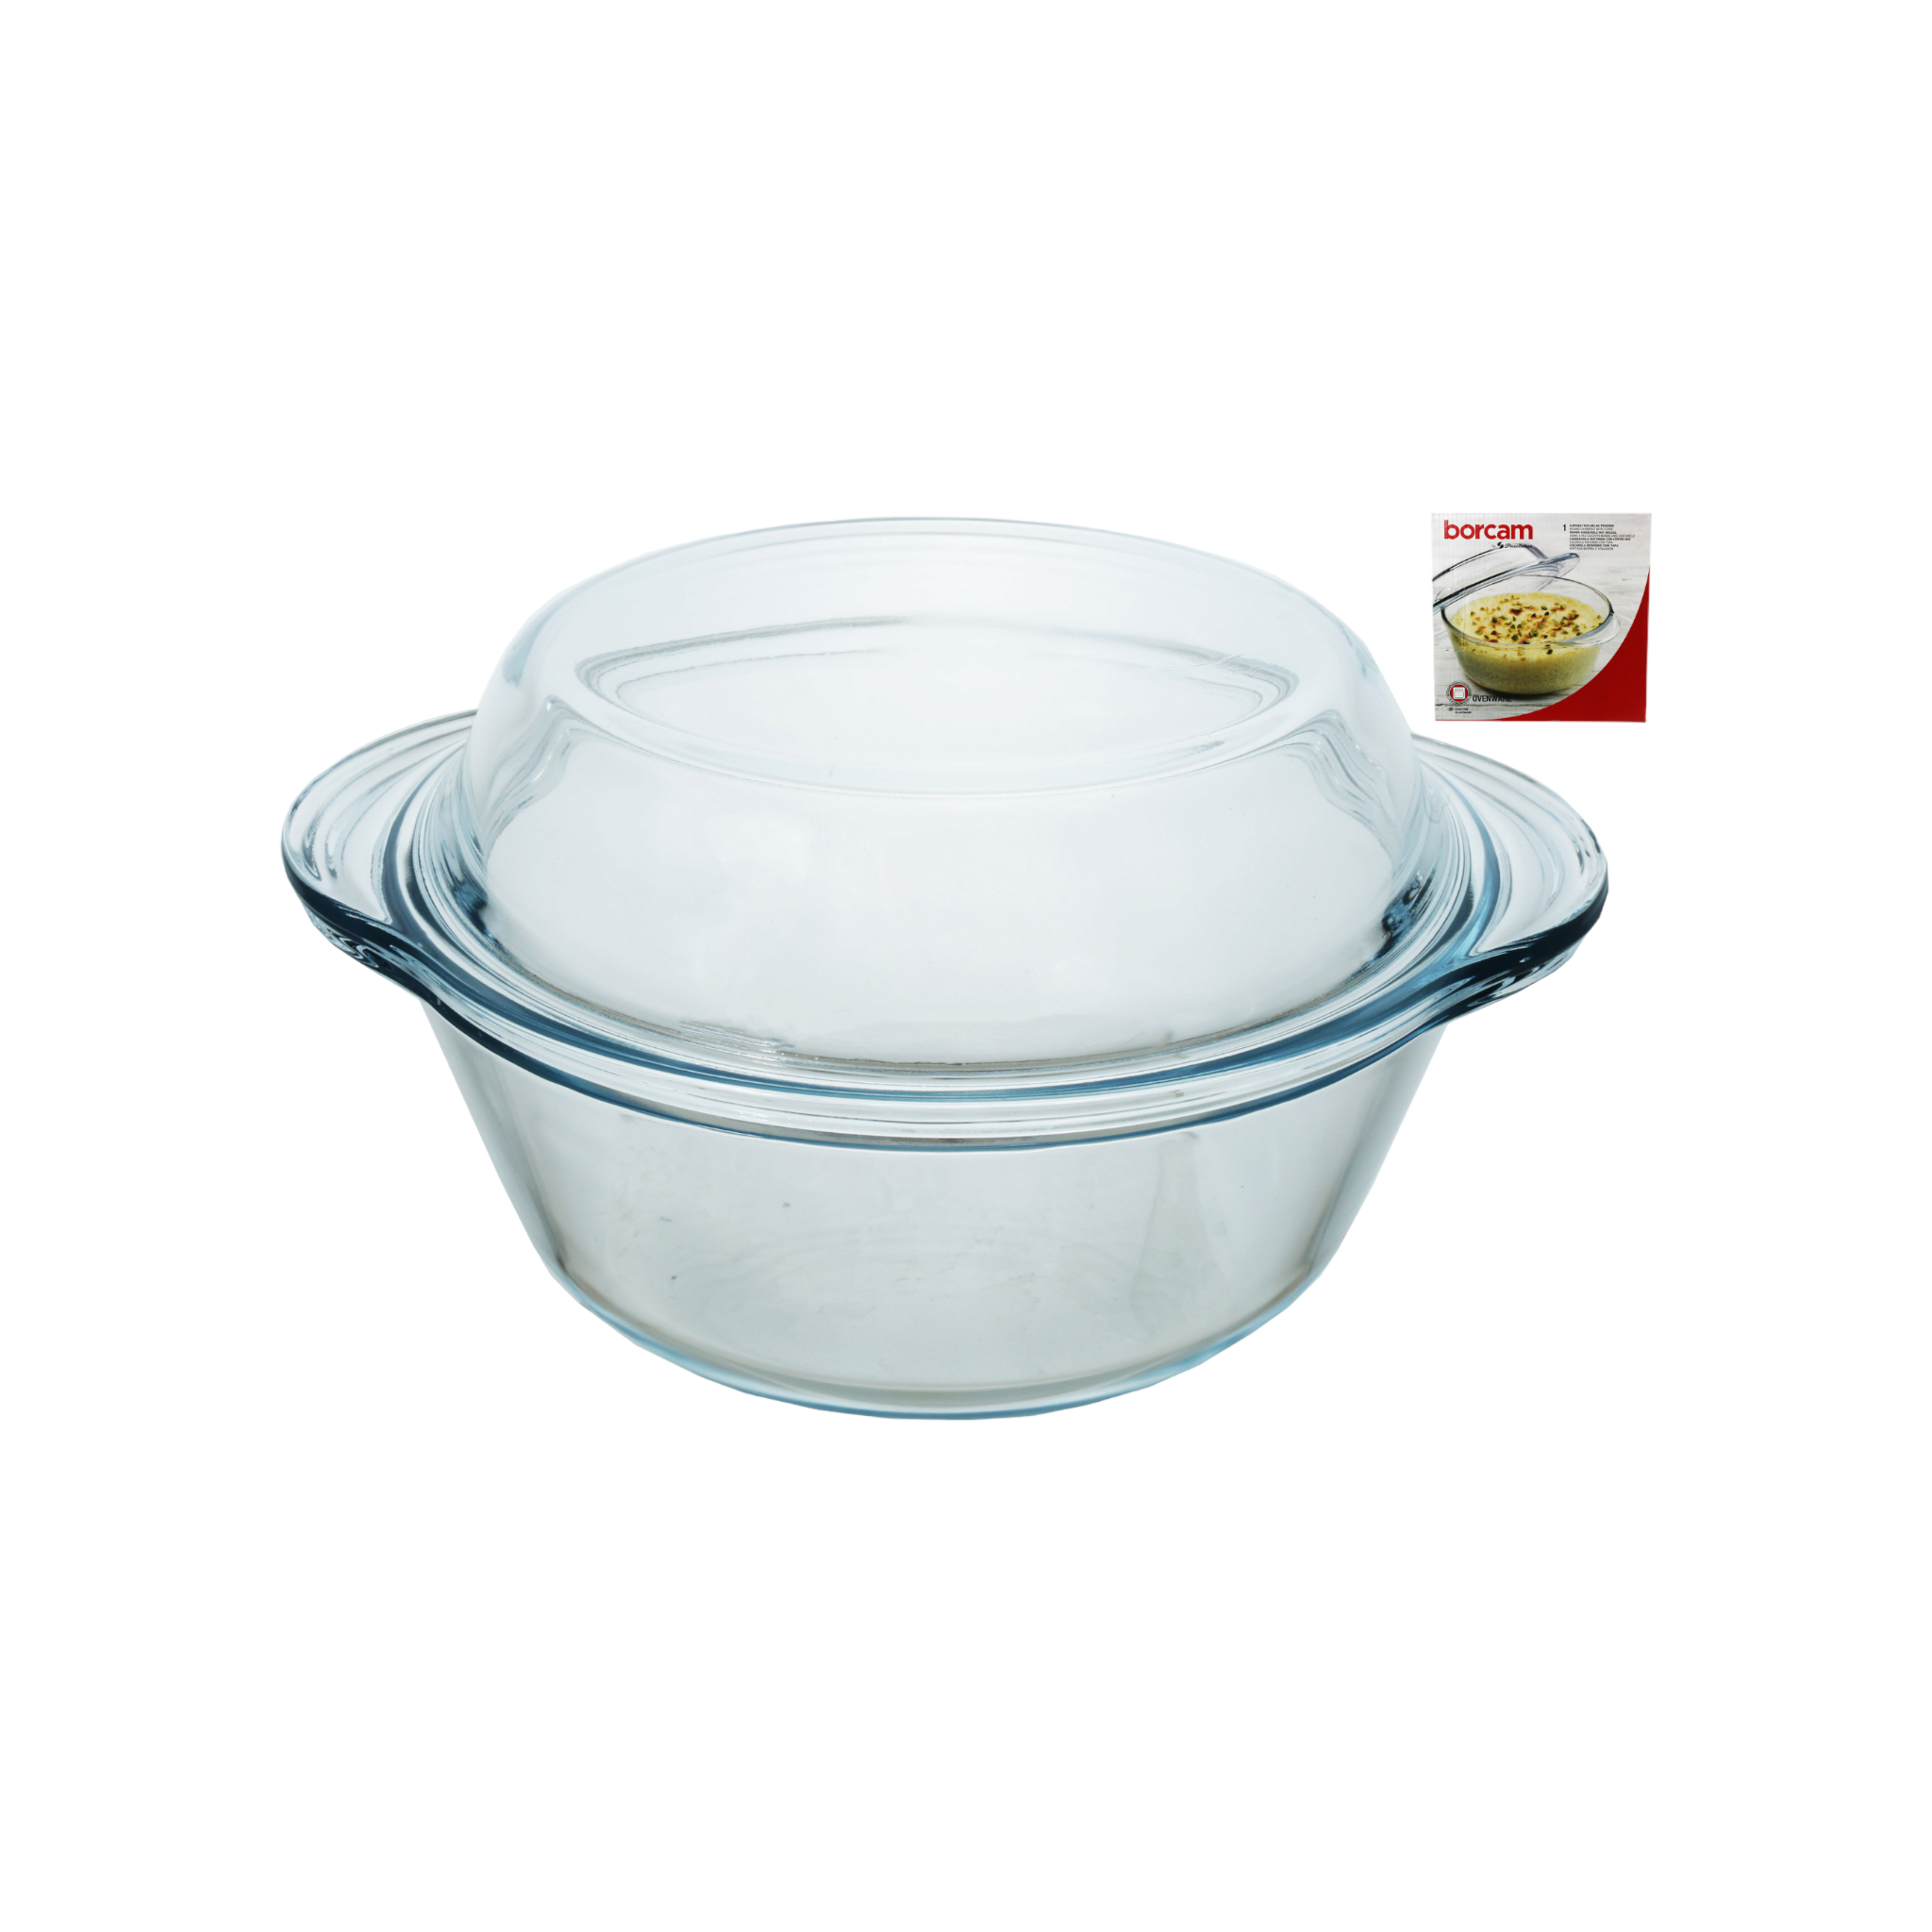 Borcam Glass Serving Dish Casserole 840ml Round with Cover 23079